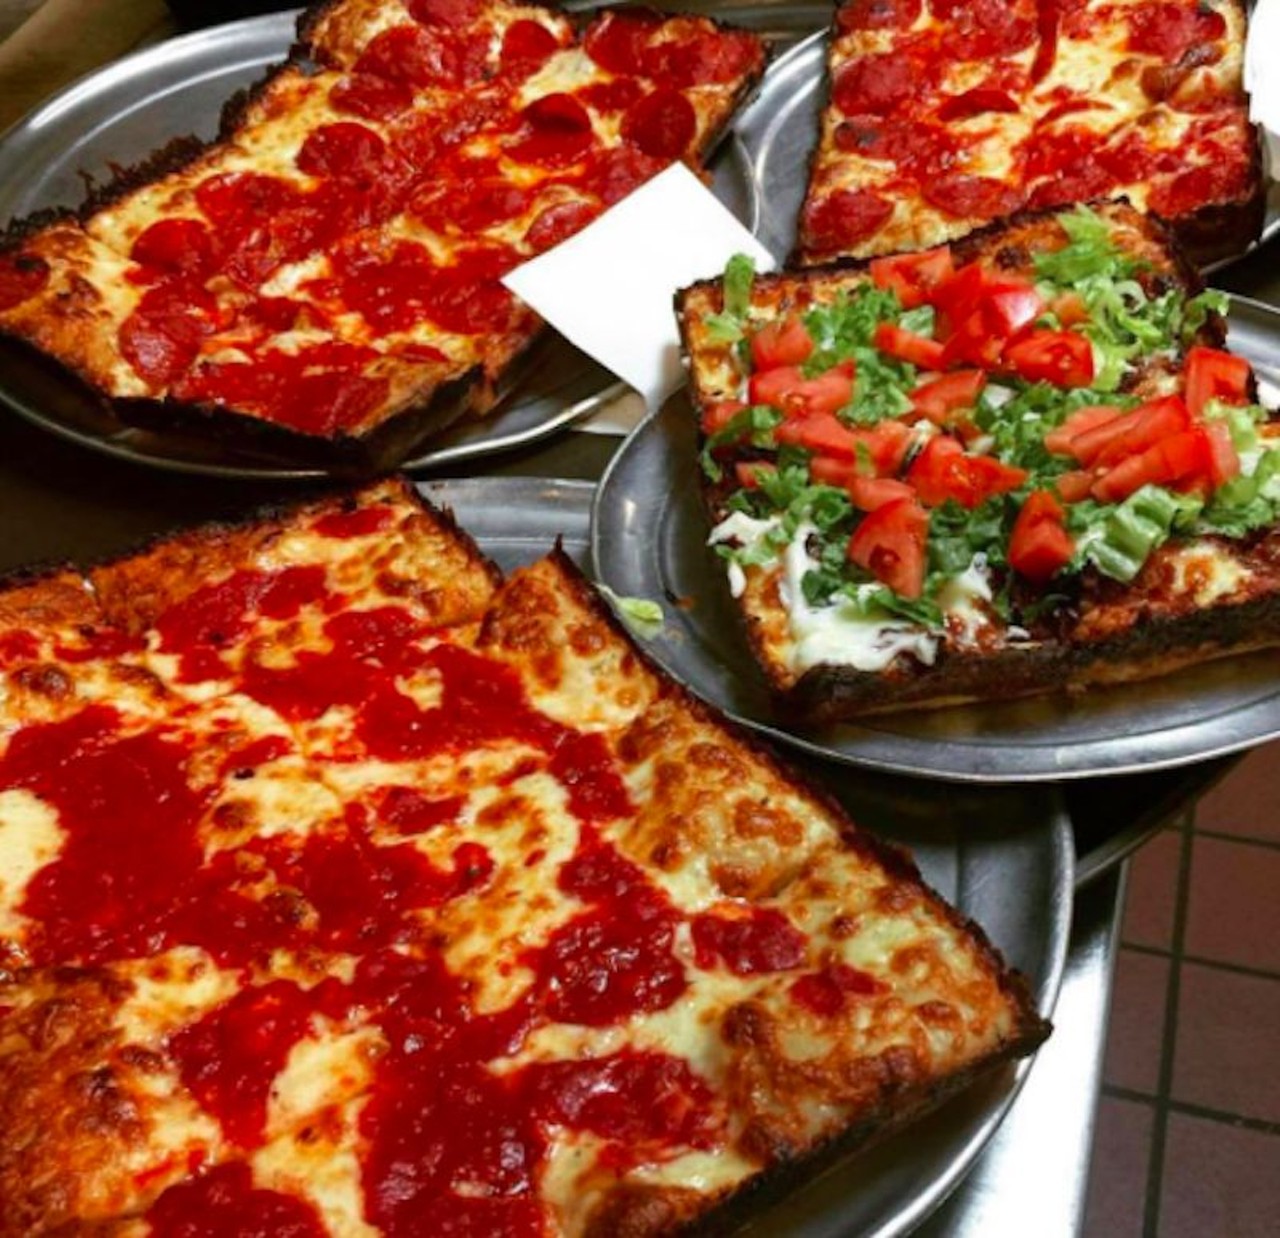 Cloverleaf Pizza
24443 Gratiot Ave., Eastpointe; 586-777-5391; cloverleaf-pizza.com
Founded in 1946, these Detroit-style pizzas have been a local favorite for decades.Photo via Cloverleaf Pizza / Facebook